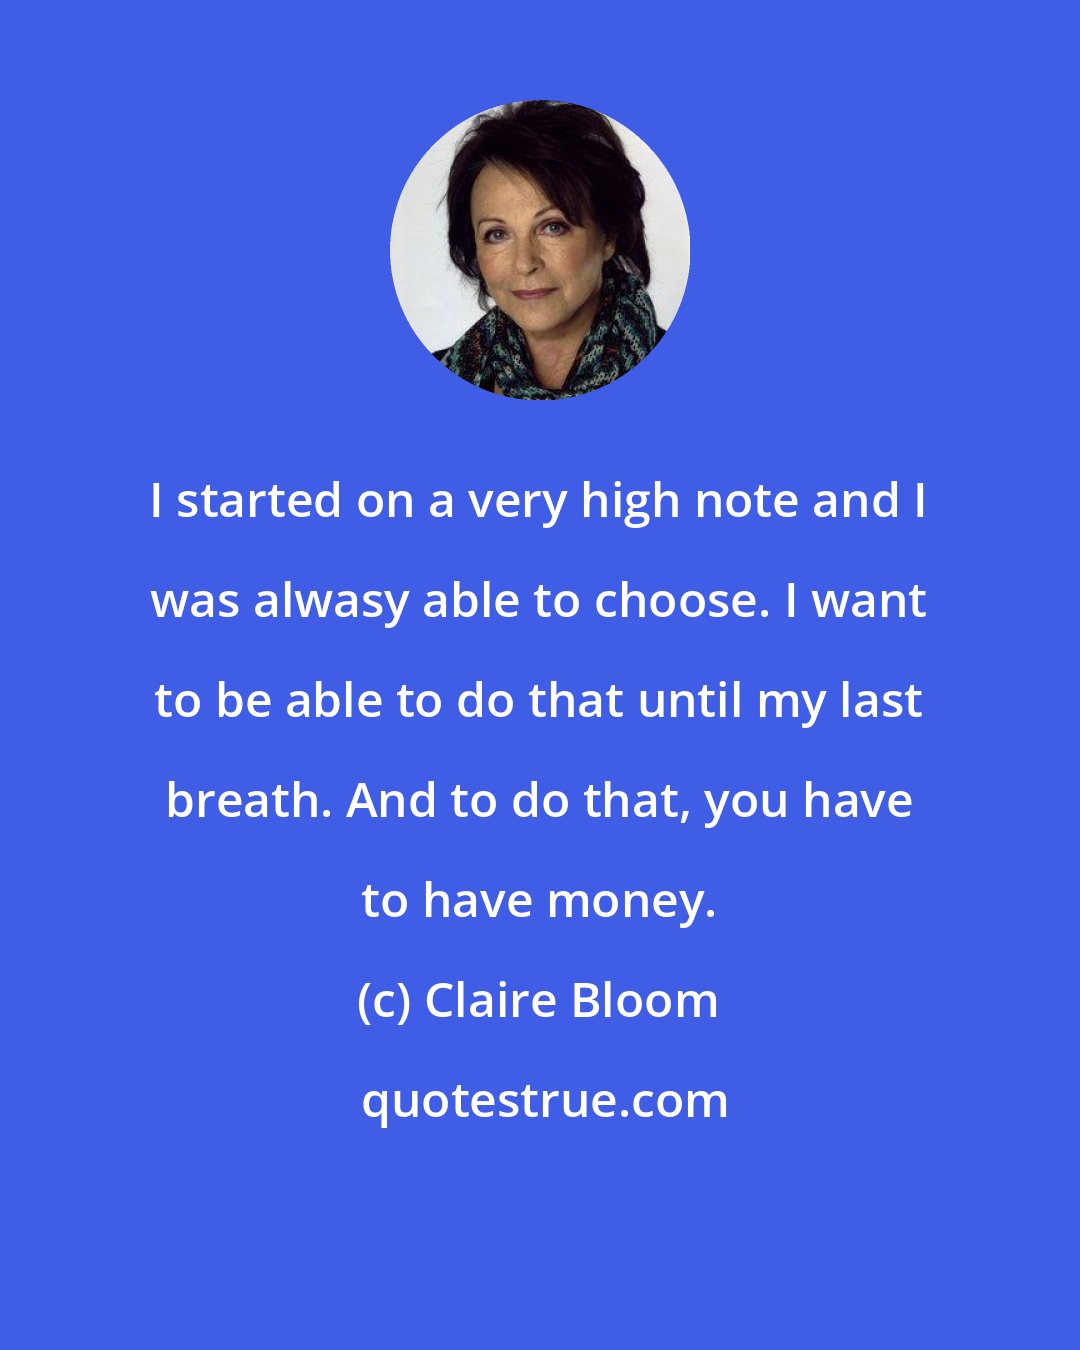 Claire Bloom: I started on a very high note and I was alwasy able to choose. I want to be able to do that until my last breath. And to do that, you have to have money.